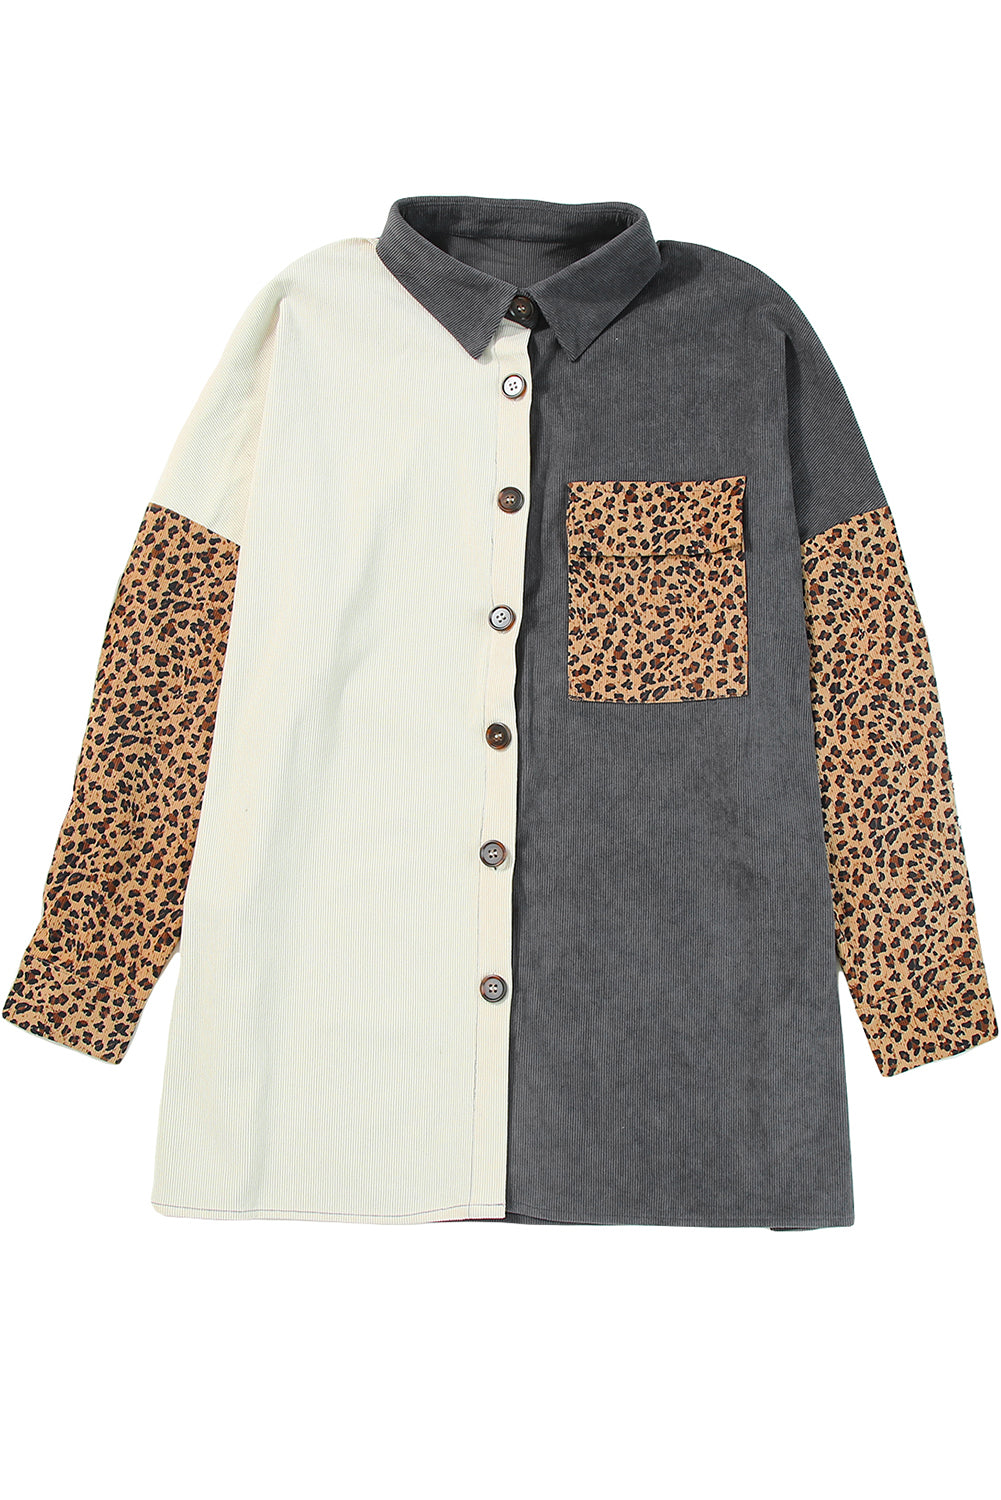 Gray Color Block Leopard Patched Corduroy Shacket